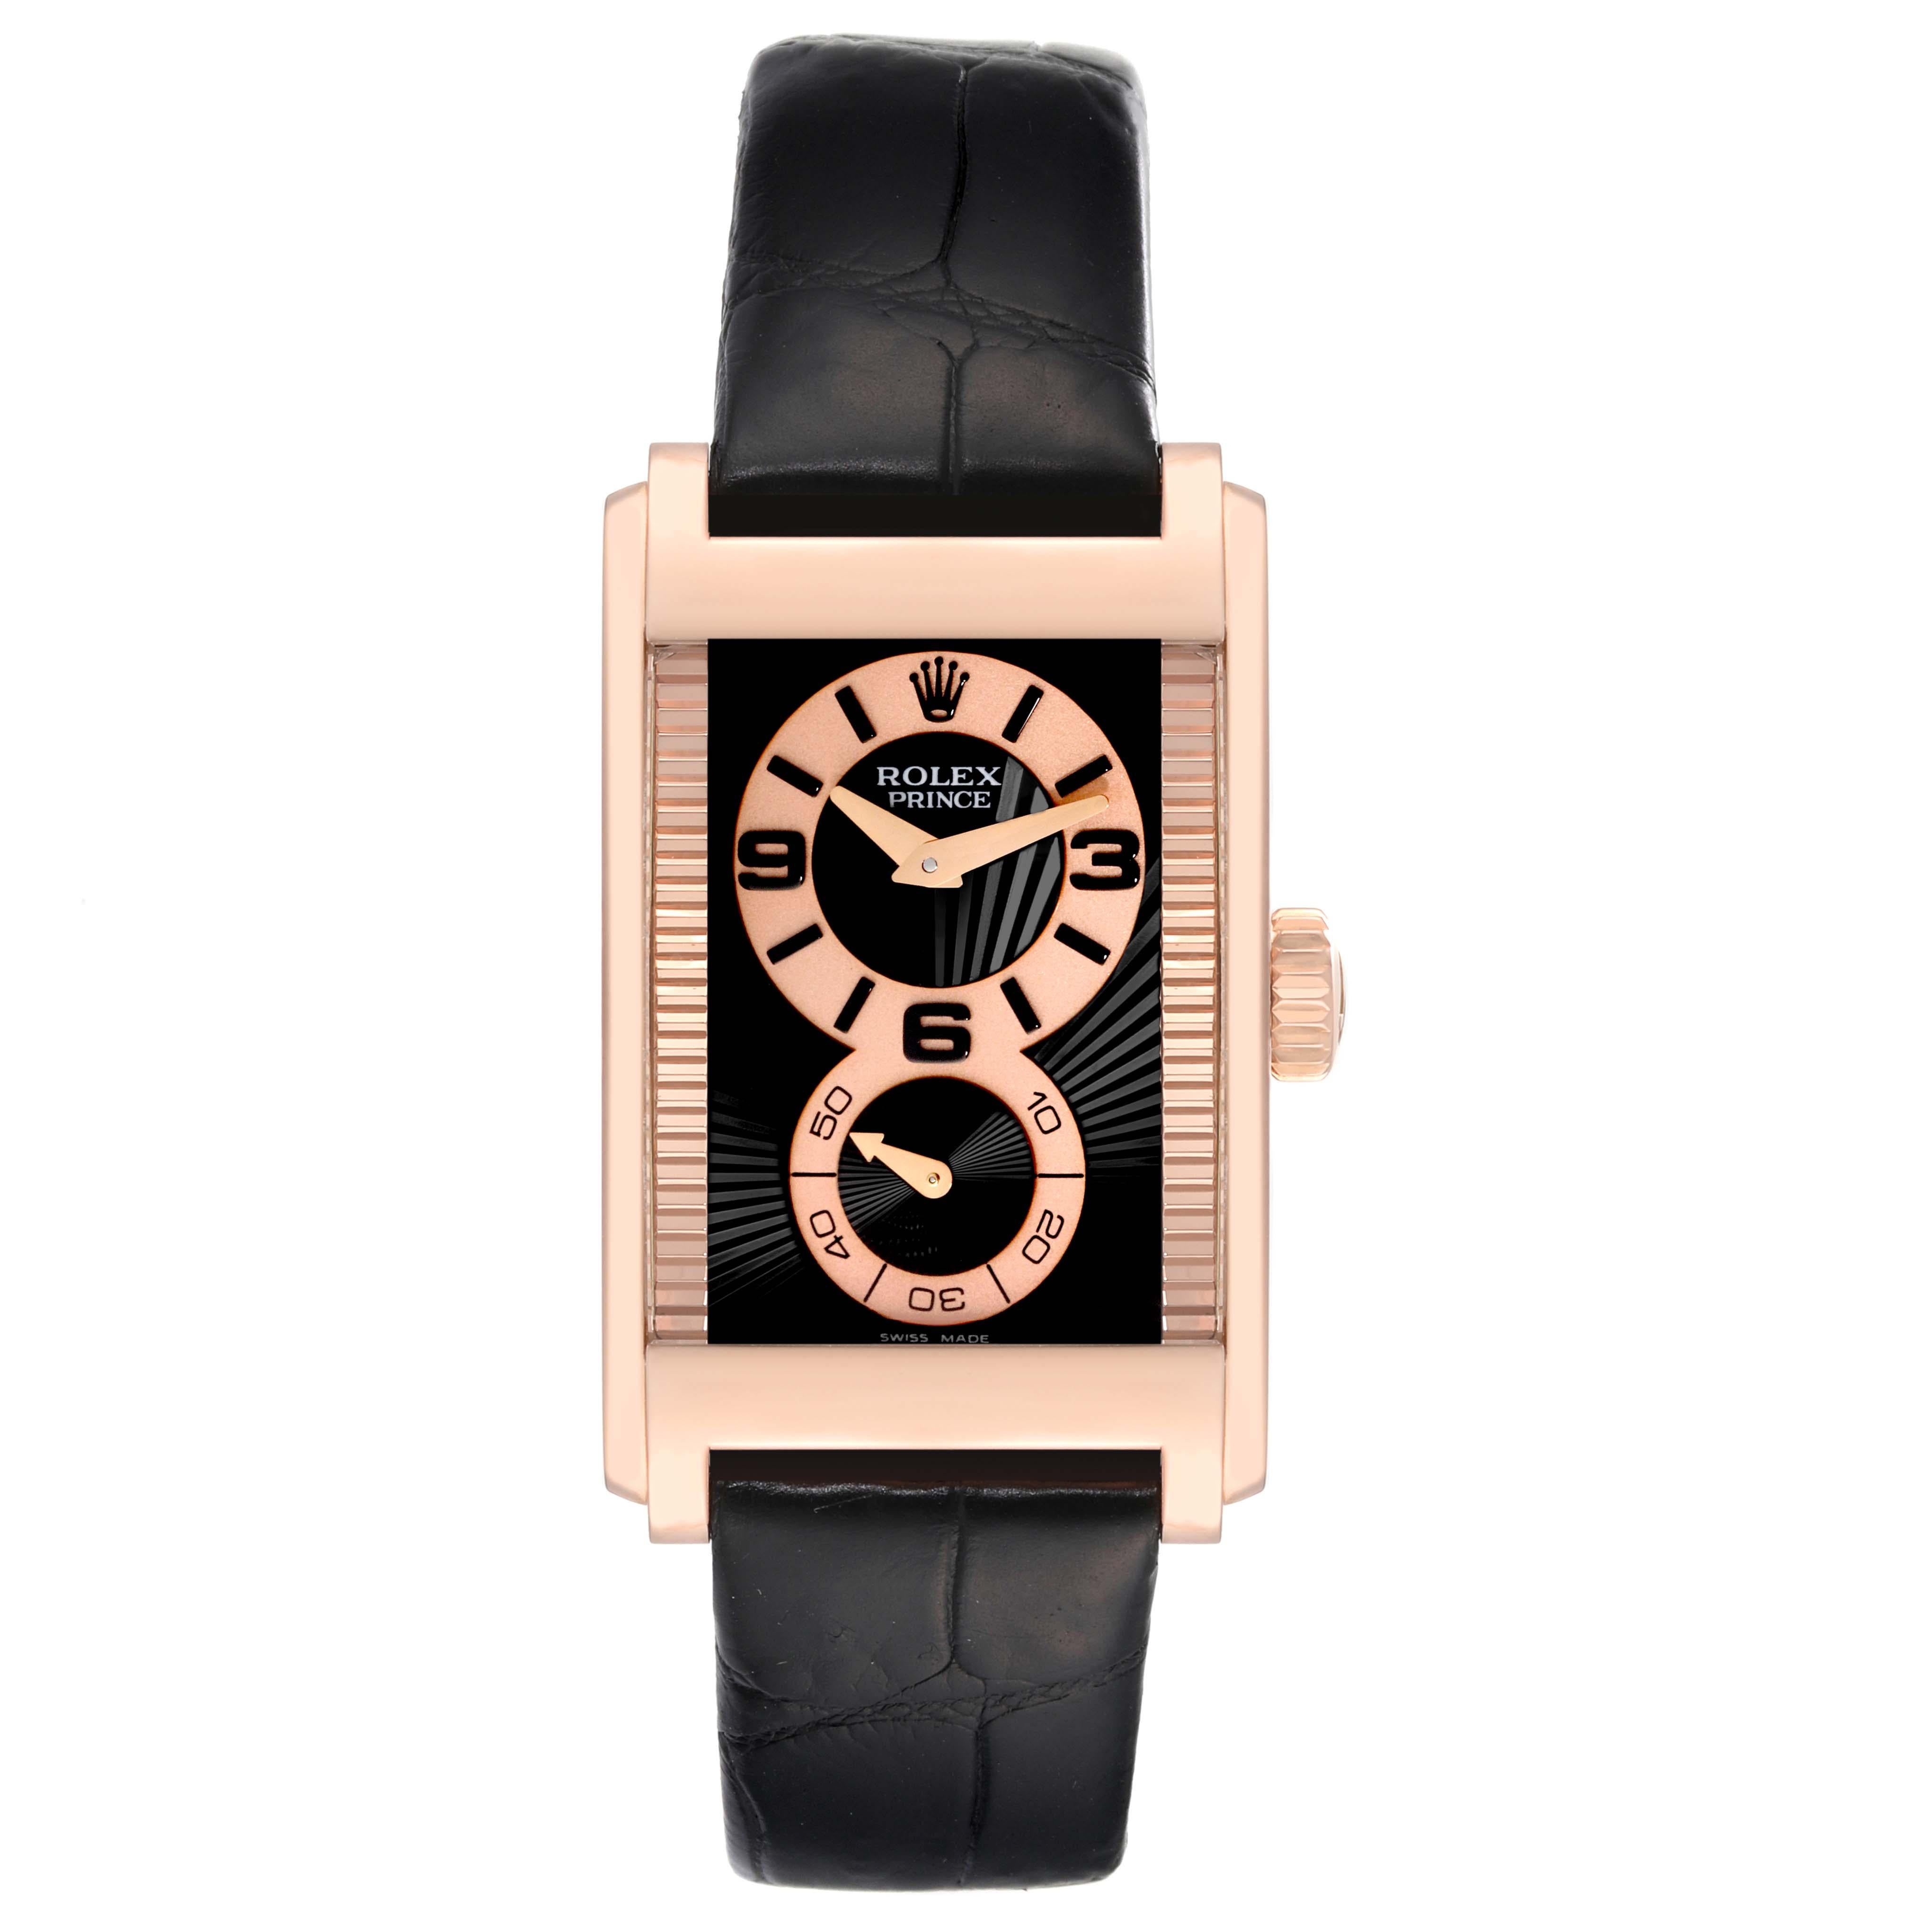 Rolex Cellini Prince Rose Gold Black Dial Leather Strap Mens Watch 5442. Manual winding movement. 18k Everose gold case 28.0 x 47.0 mm. Rolex logo on a crown. Exhibition transparent sapphire crystal case back. . Scratch resistant sapphire crystal.